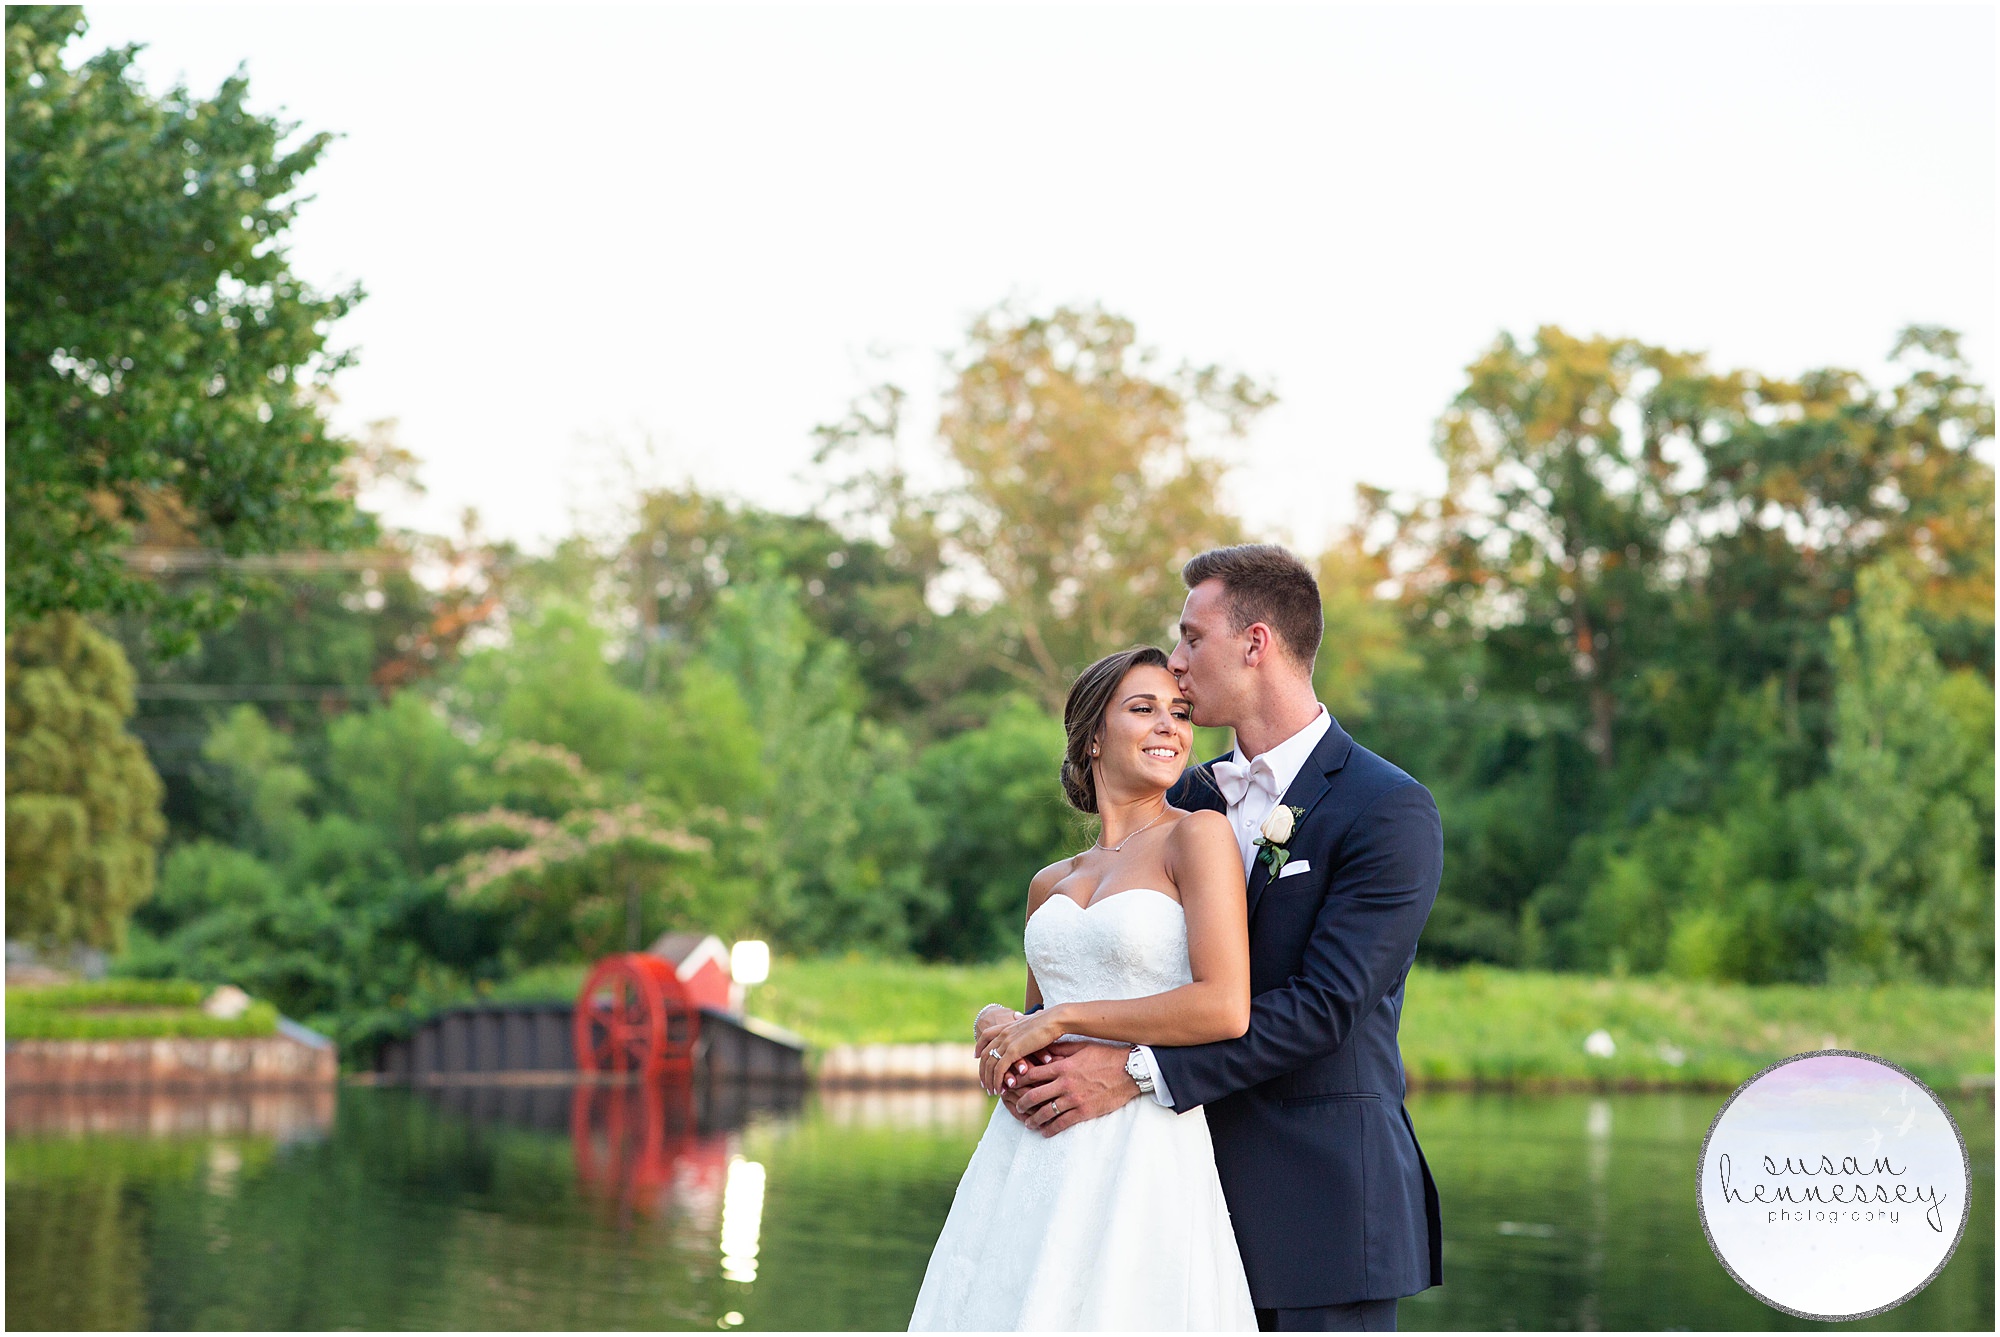 Golden hour portraits on lake with mill in background